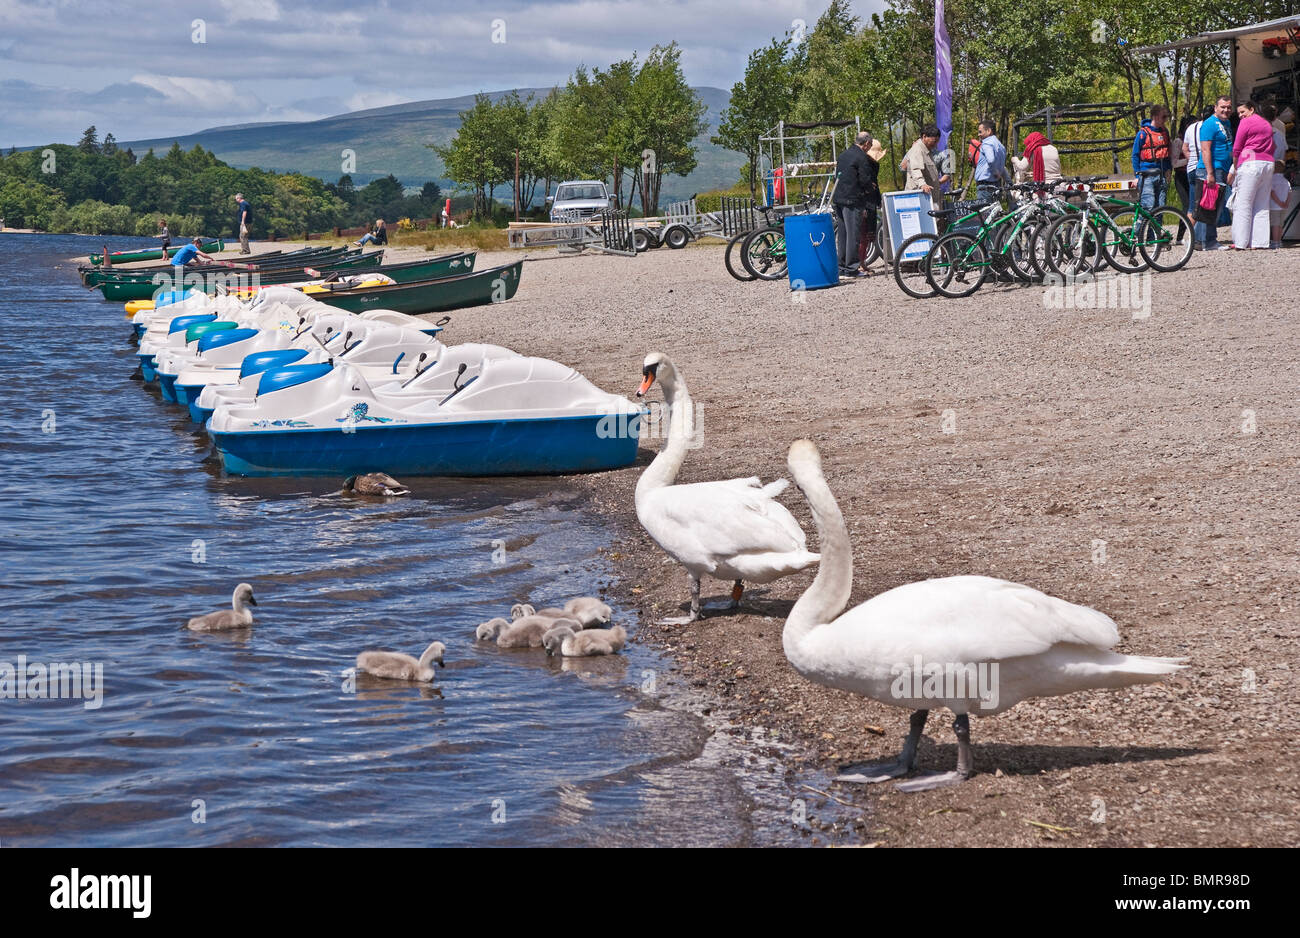 A family of swans are entering Loch Lomond at Loch Lomond Shores West Dunbartonshire Scotland with boats and cycles for hire. Stock Photo